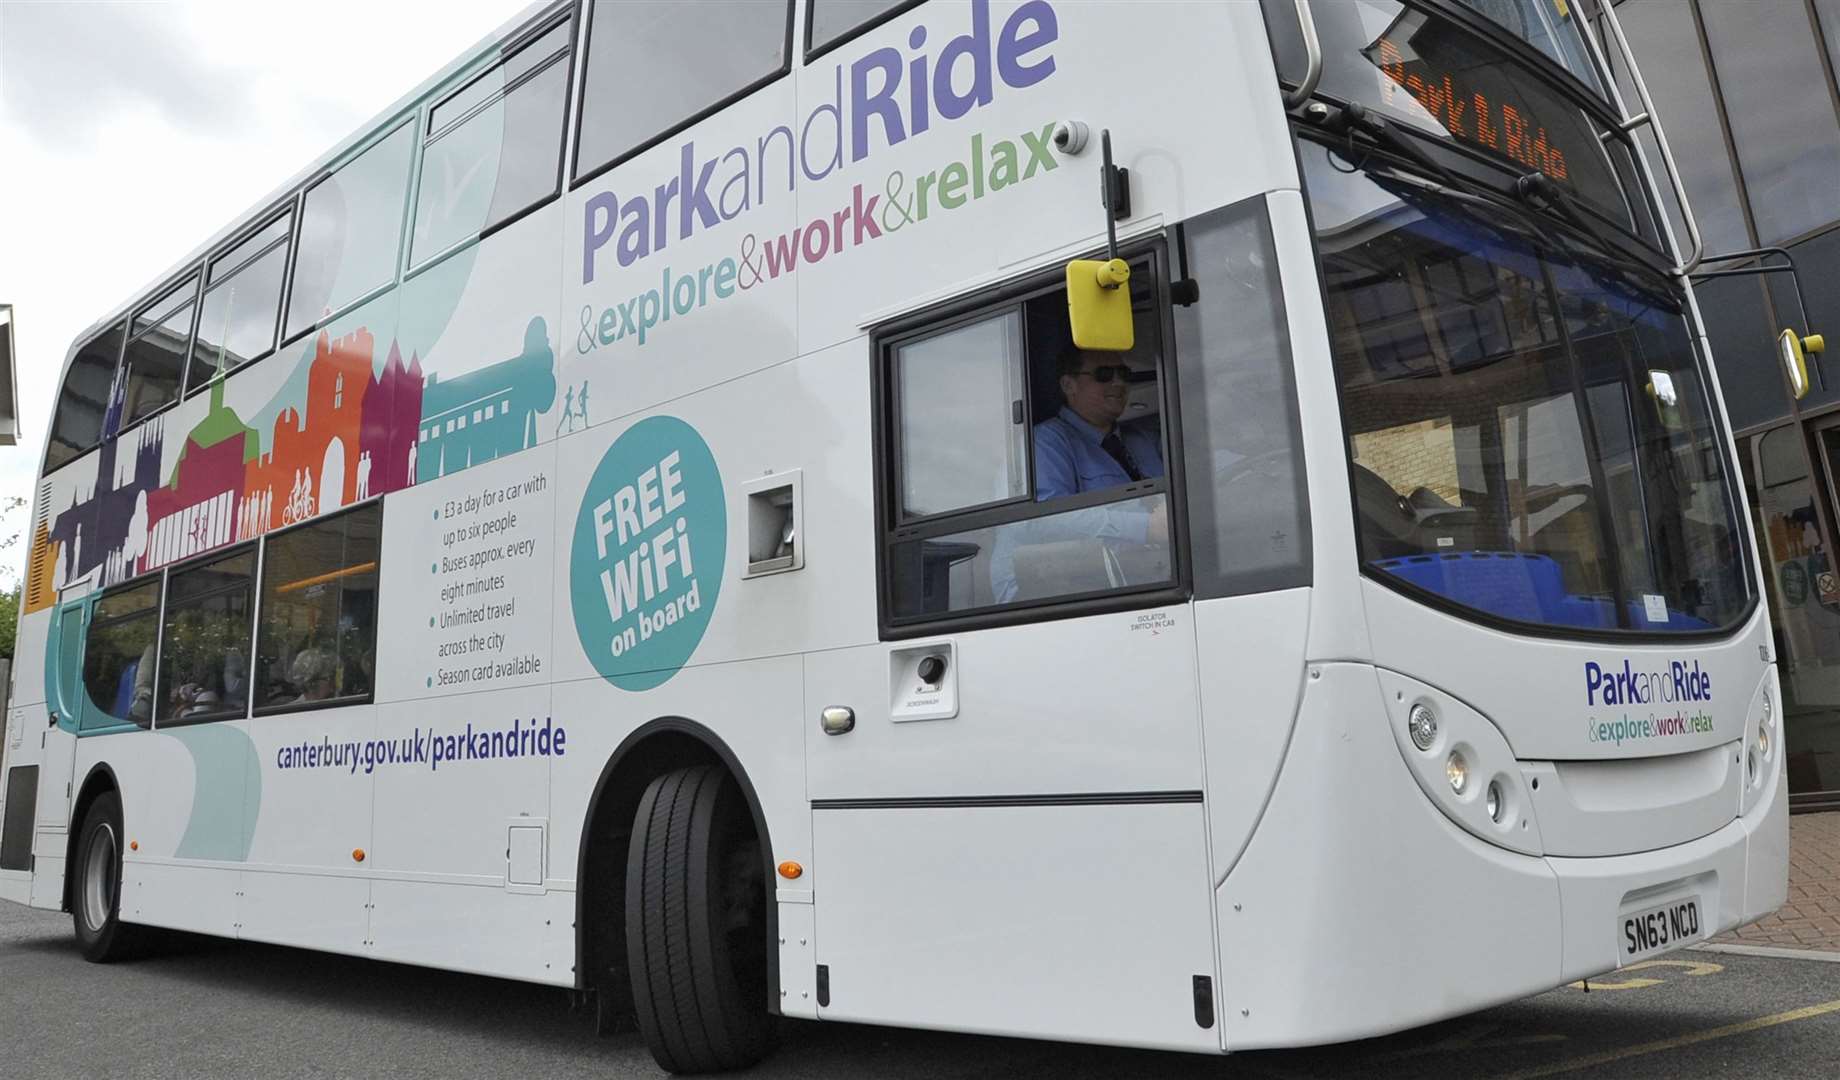 All park and ride buses will come off the road